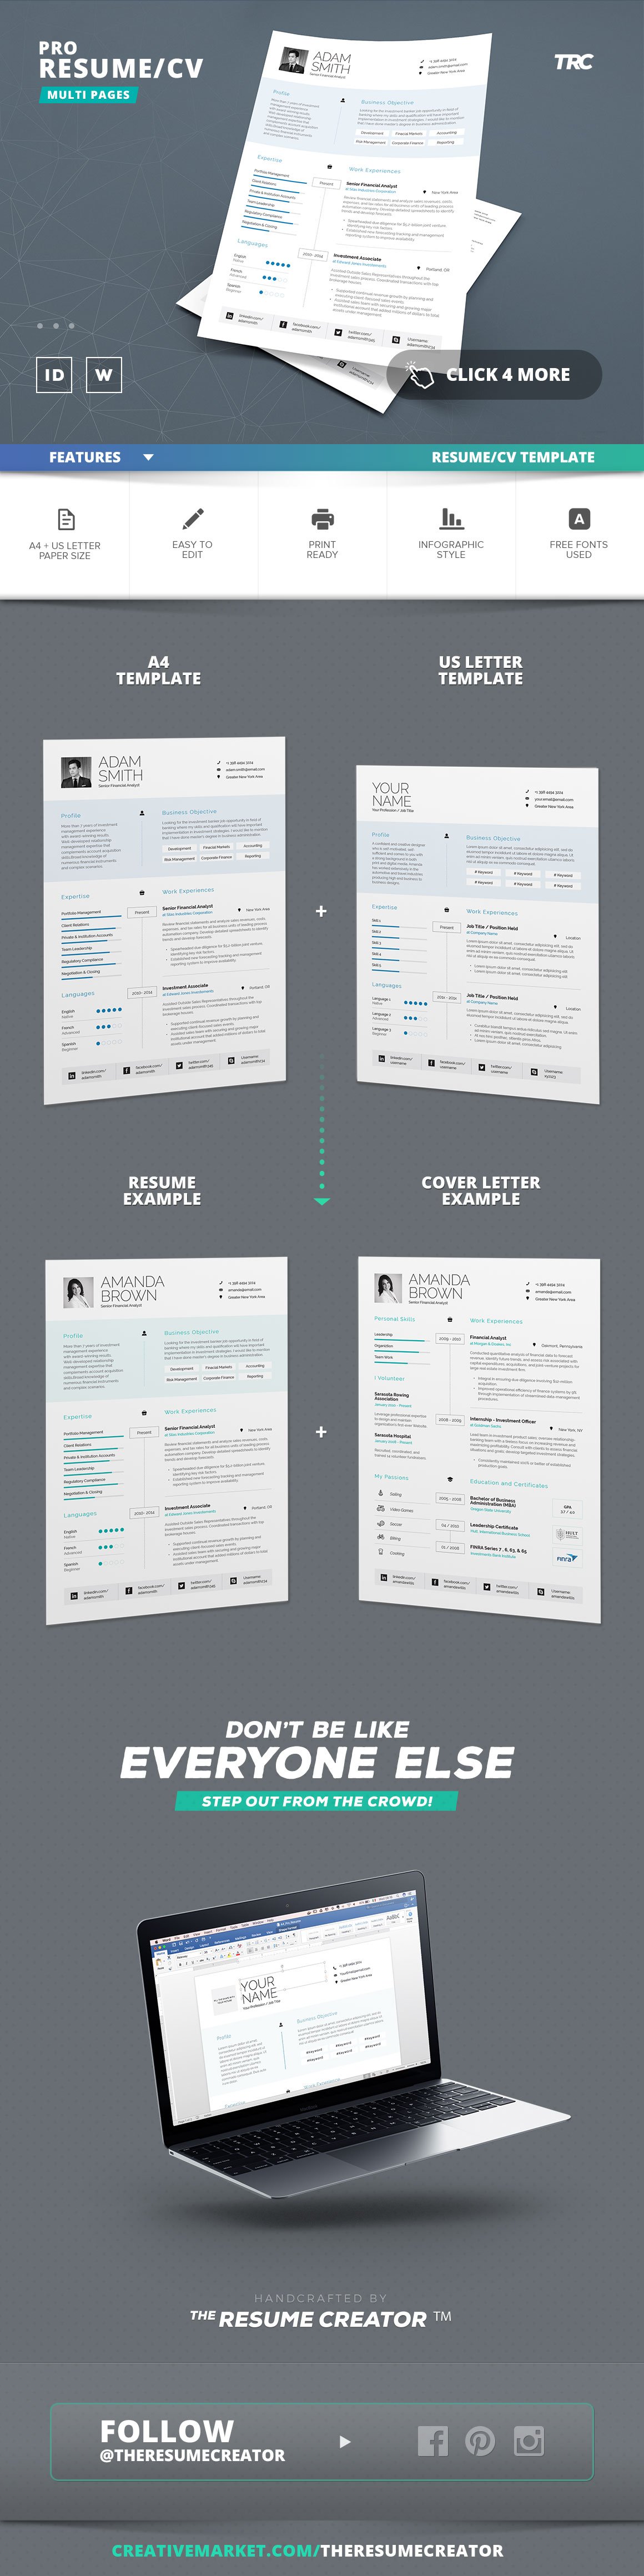 Pro Resume/Cv Template preview image.